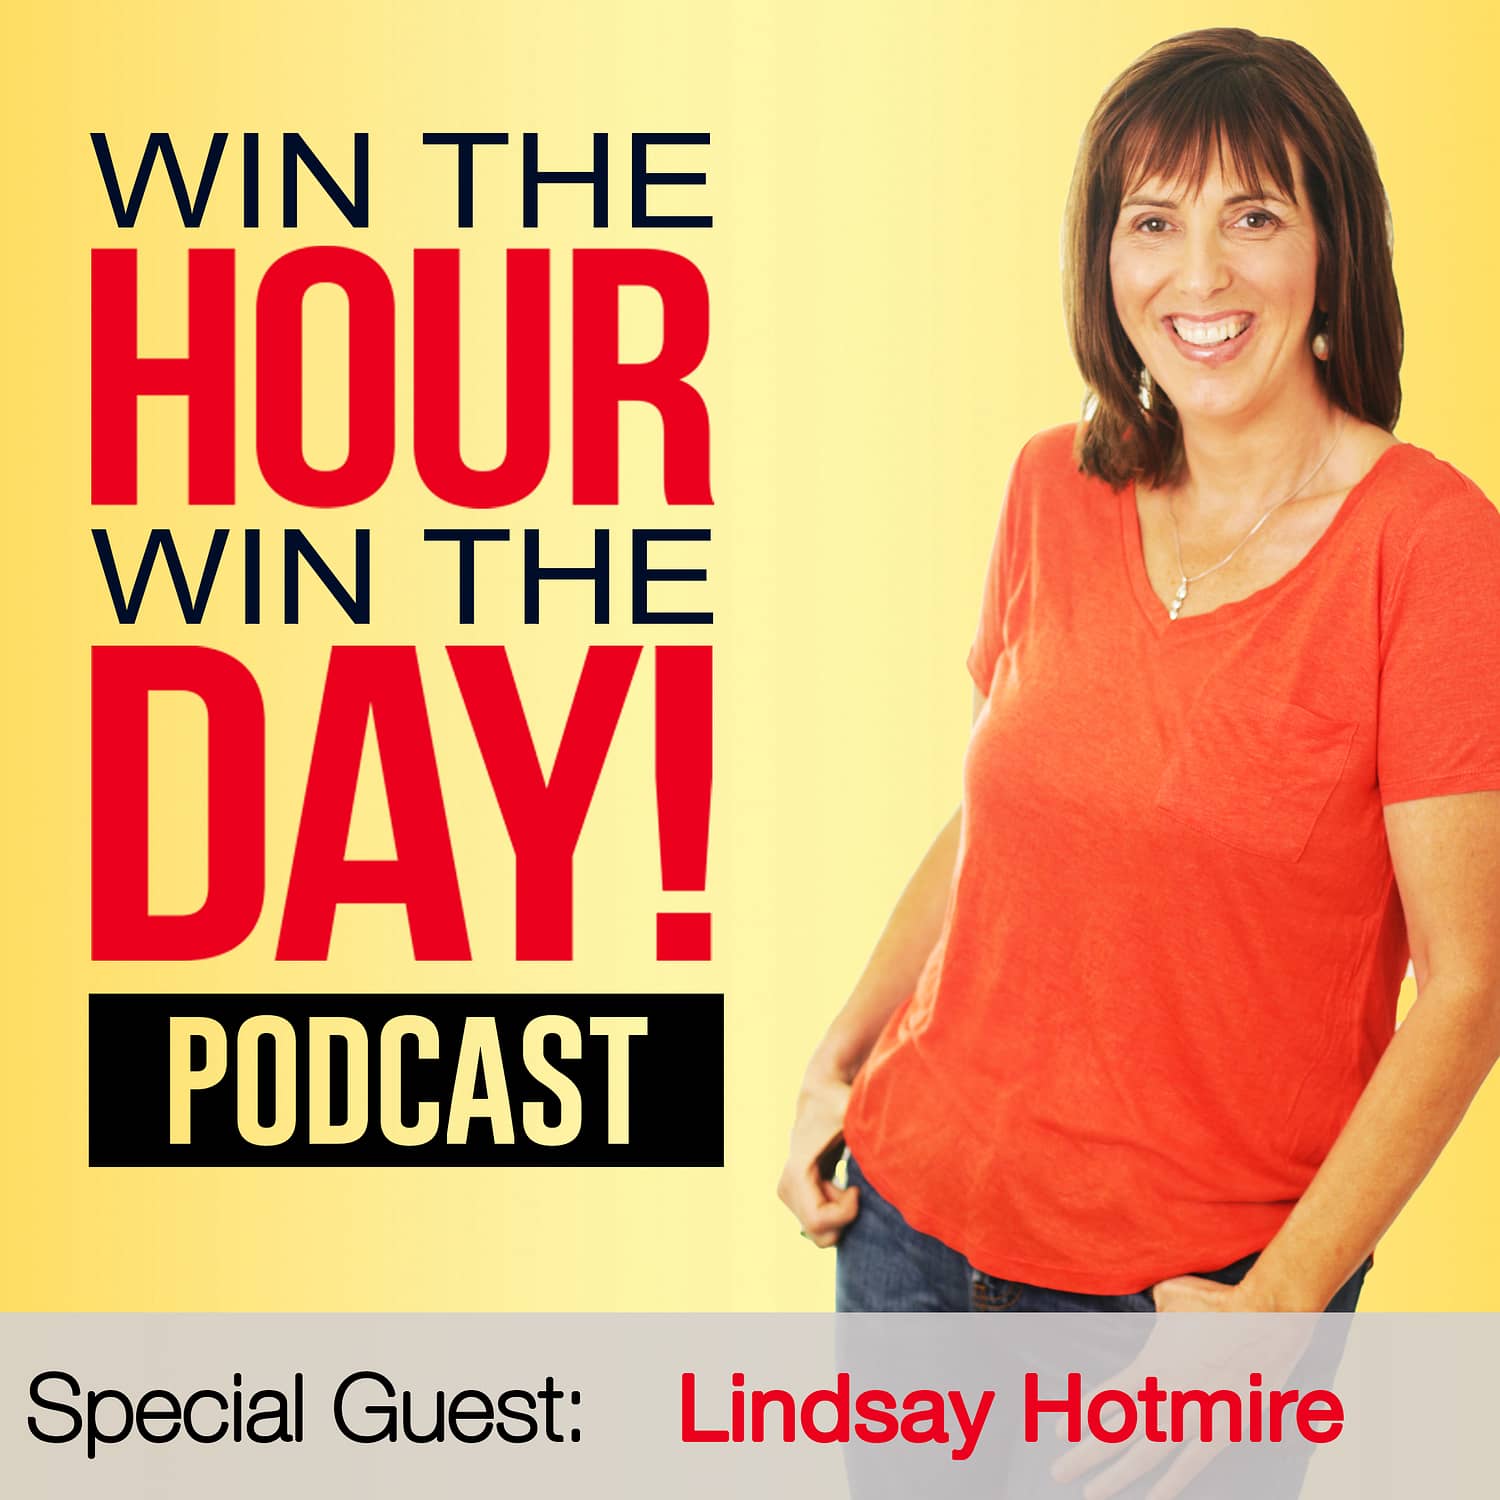 How To Build Your Business With Brand Storytelling! with Lindsay Hotmire